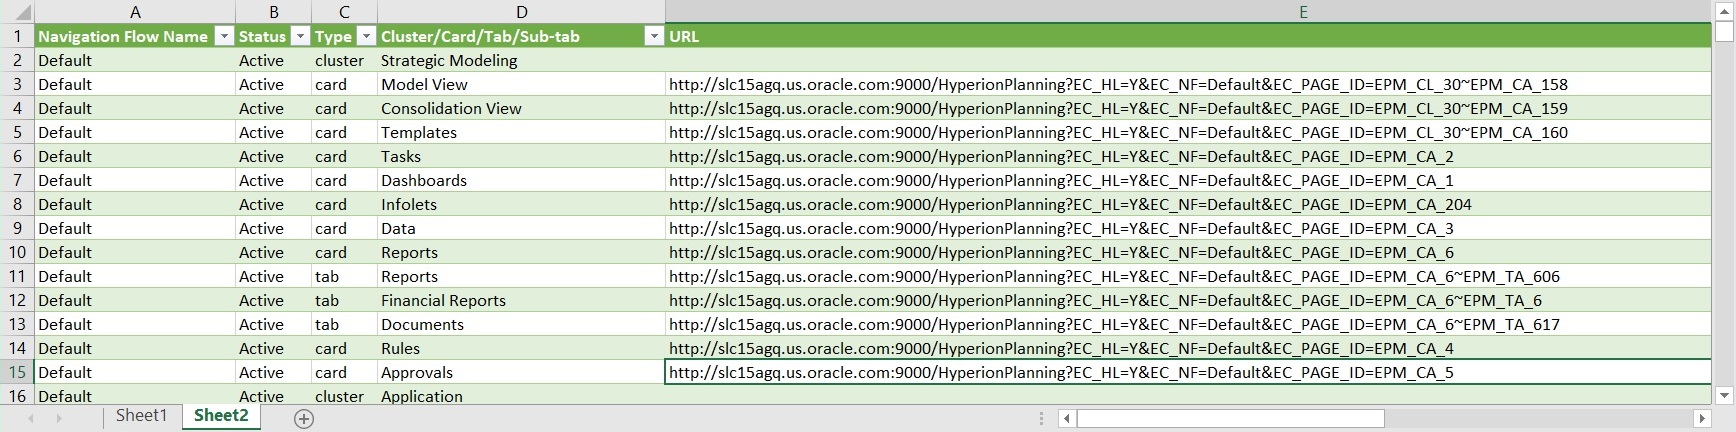 direct url to files on different server